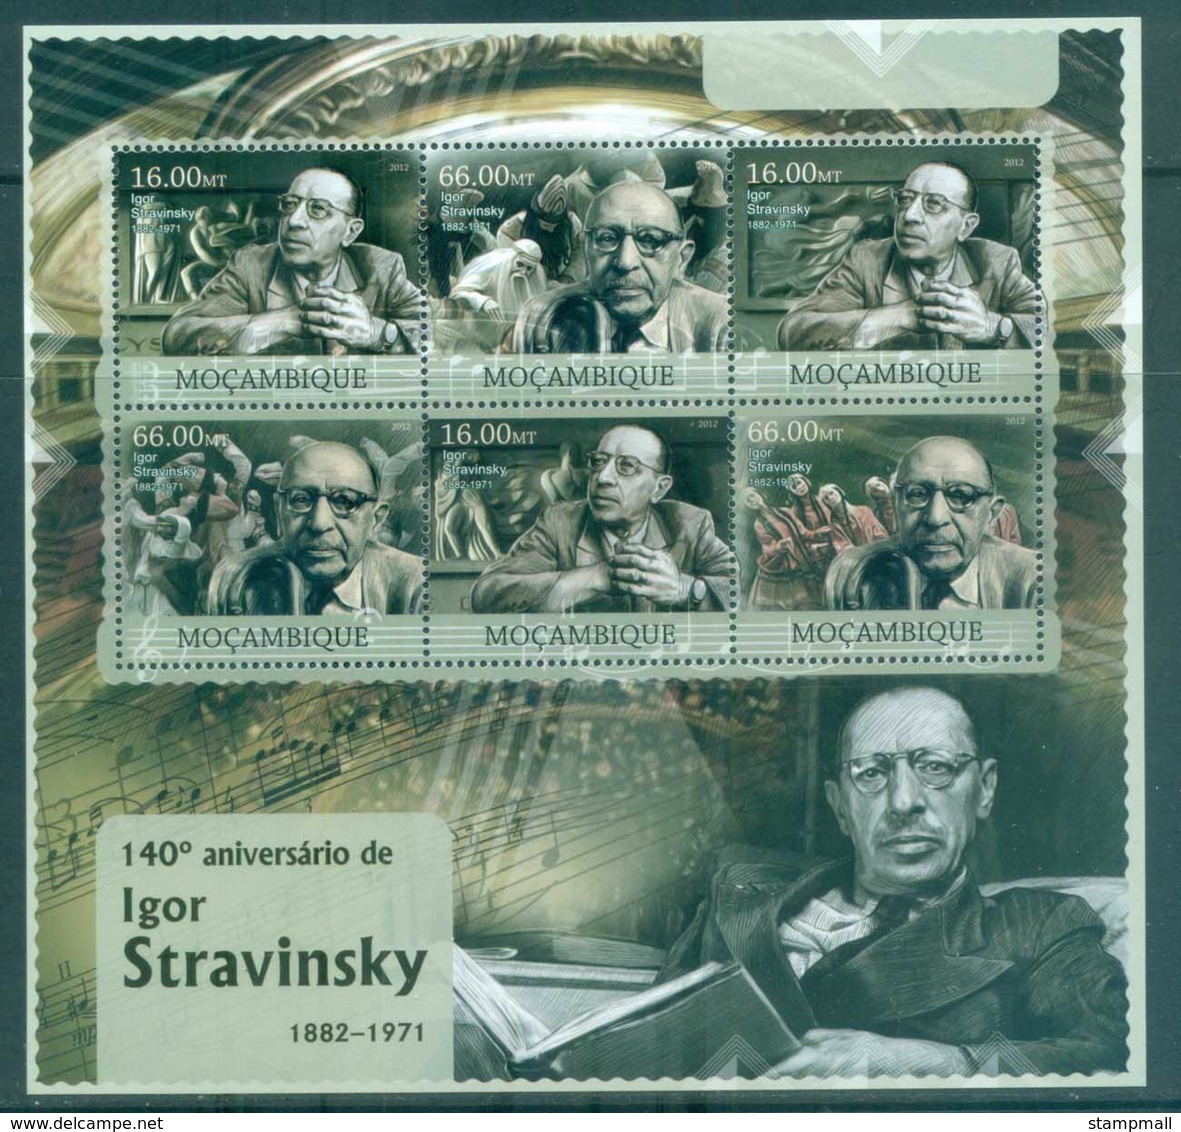 Mozambique 2012 Famous People, Music, Classical, Igor Stravinsky MS MUH MOZ032 - Mozambique